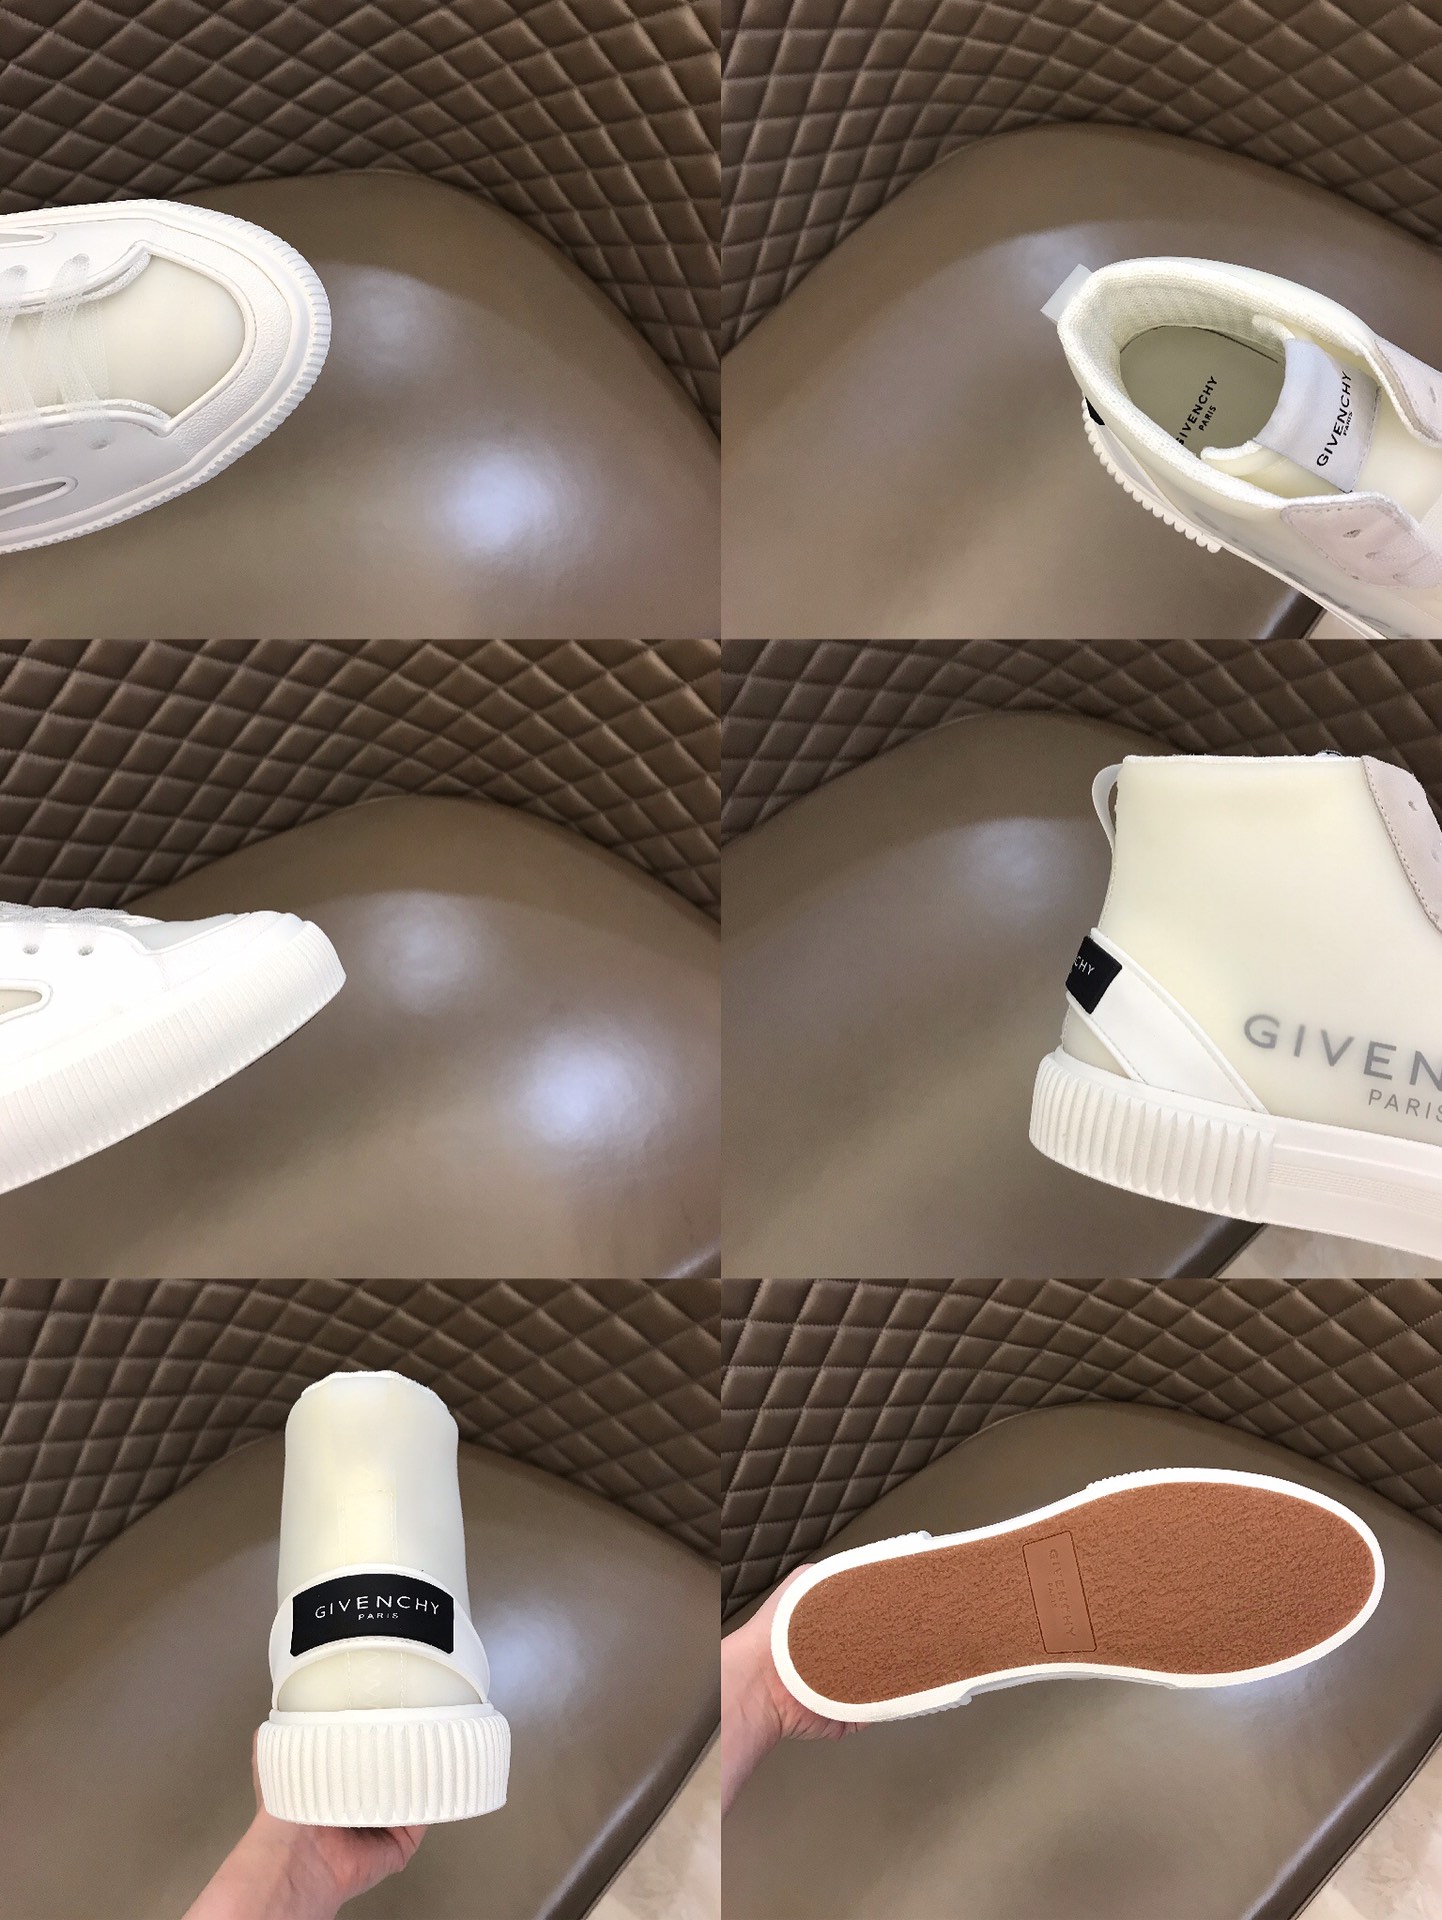 Givenchy Sneaker Rrban Street High in White